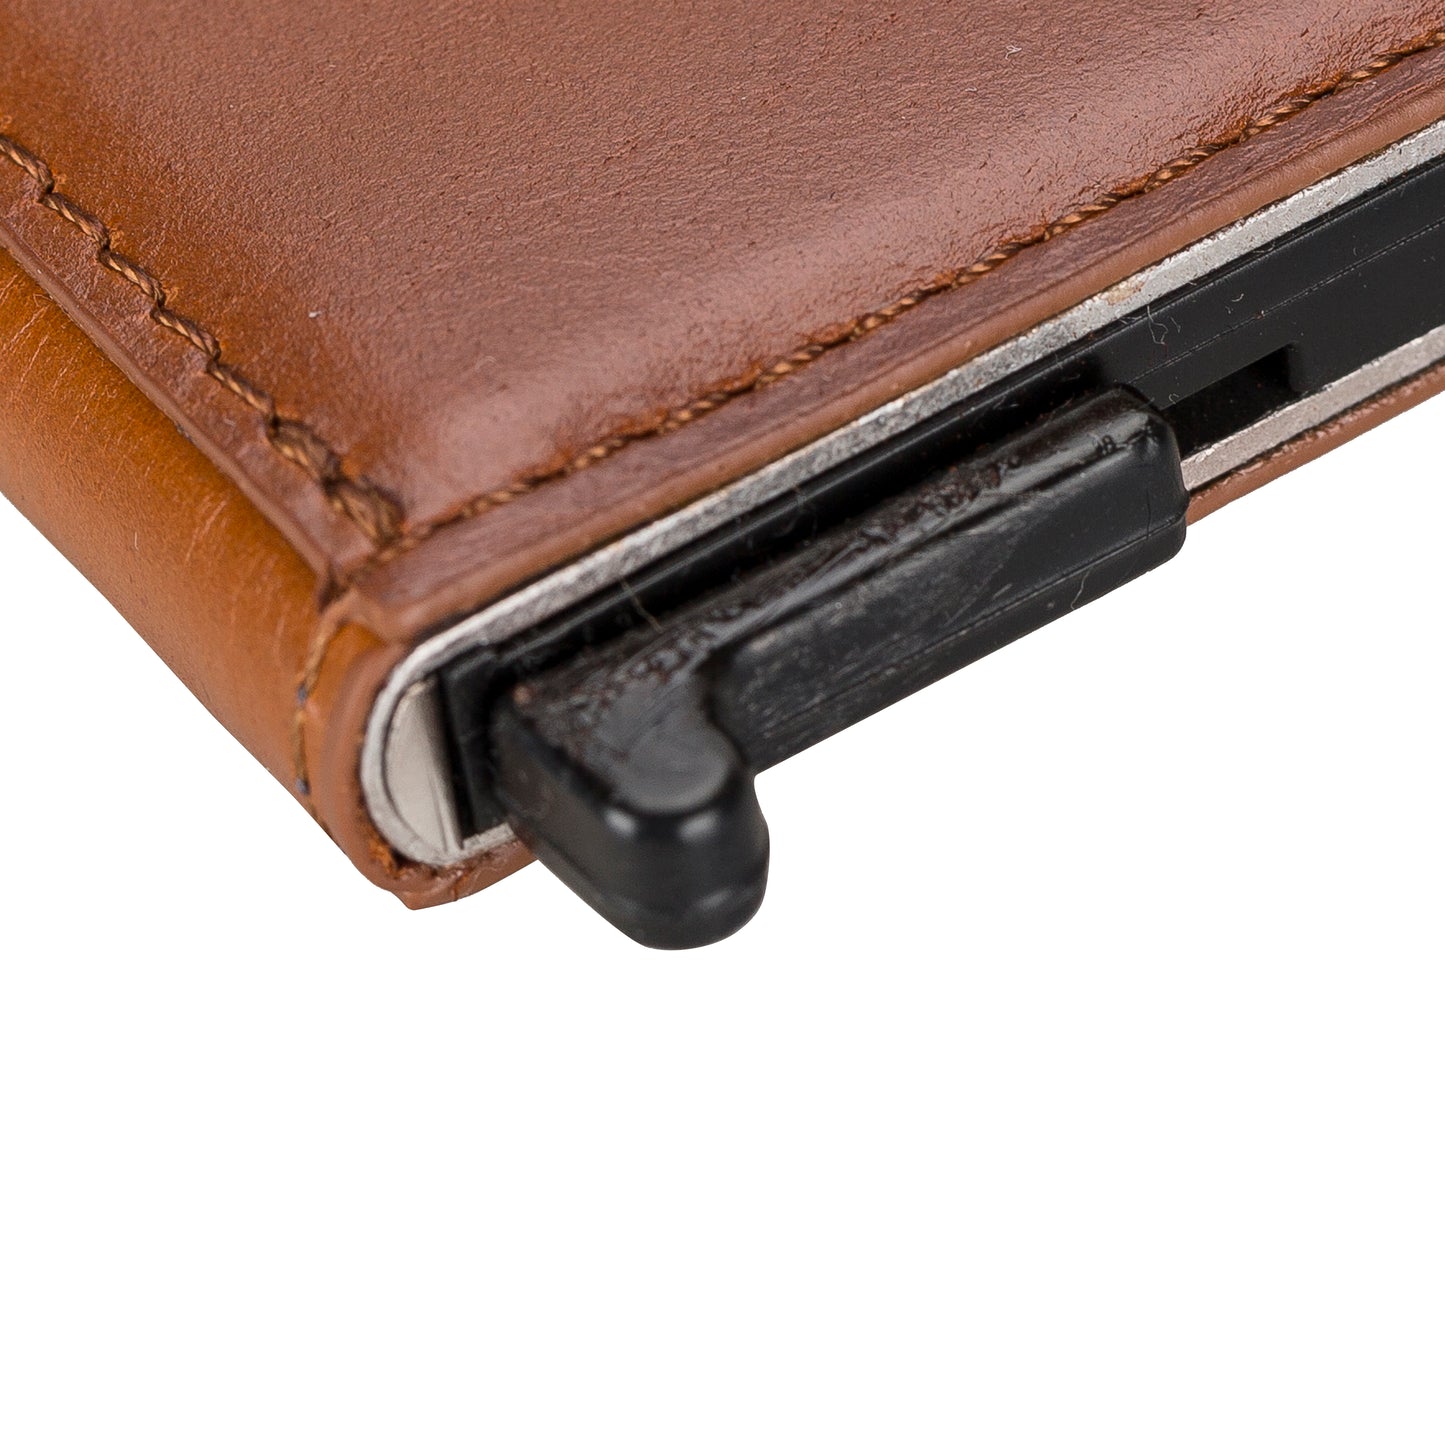 Torres Leather Mechanic Card Holder - Rustic Brown